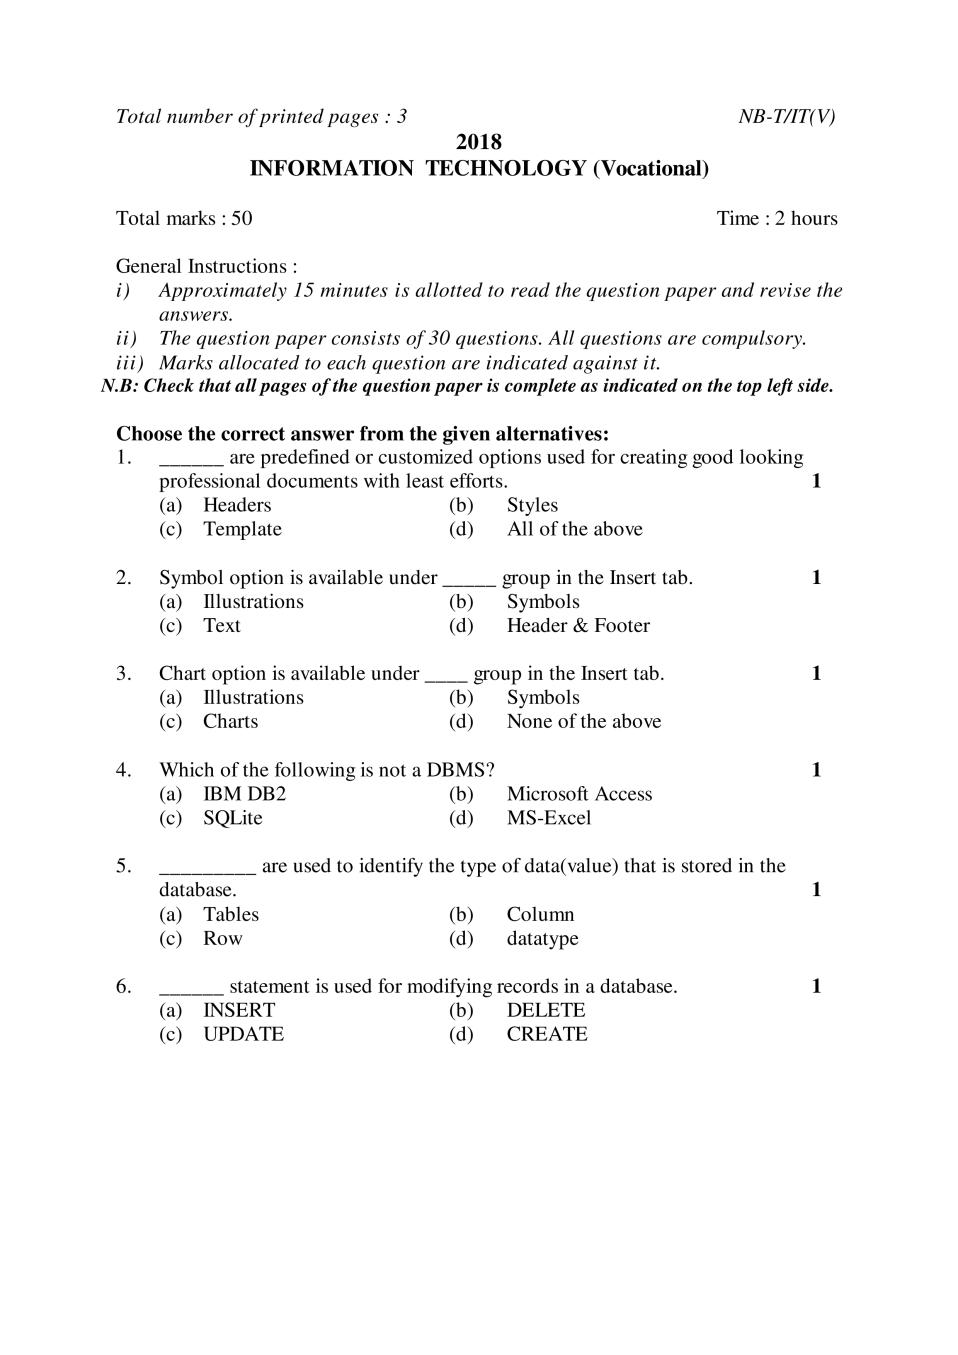 NBSE Class 10 Question Paper 2018 for Information Technology Voc - Page 1